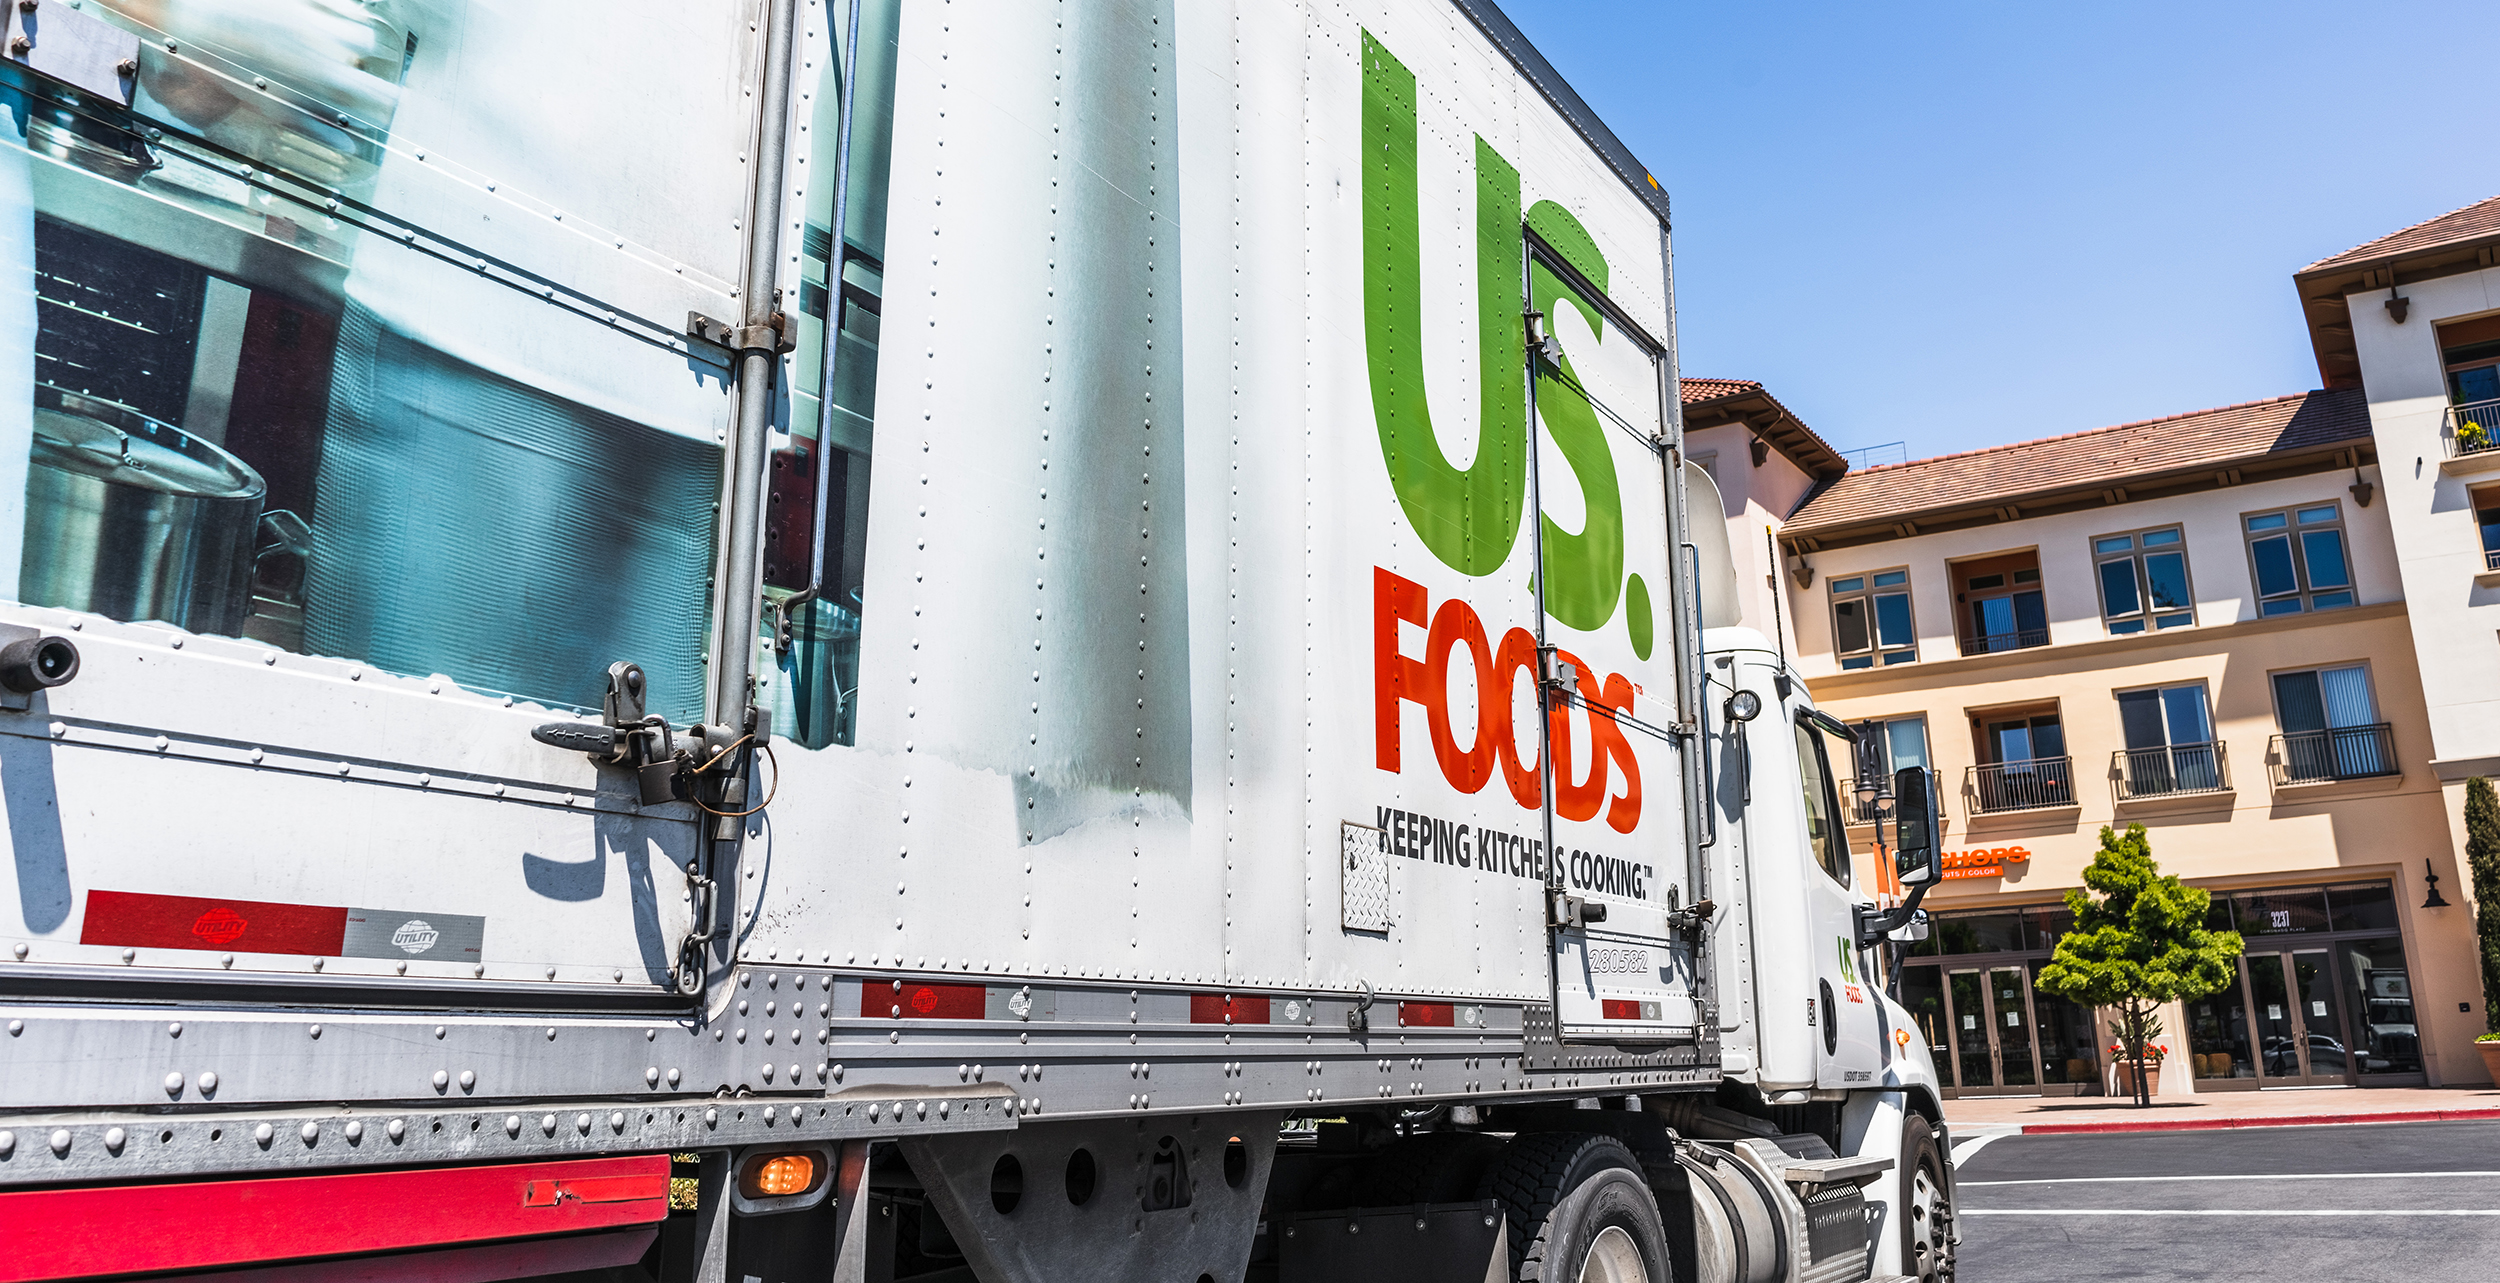 May 5, 2020 Santa Clara / CA / USA - US Foods truck driving on a street in San Francisco bay; US. Foods is an American food-service distributor